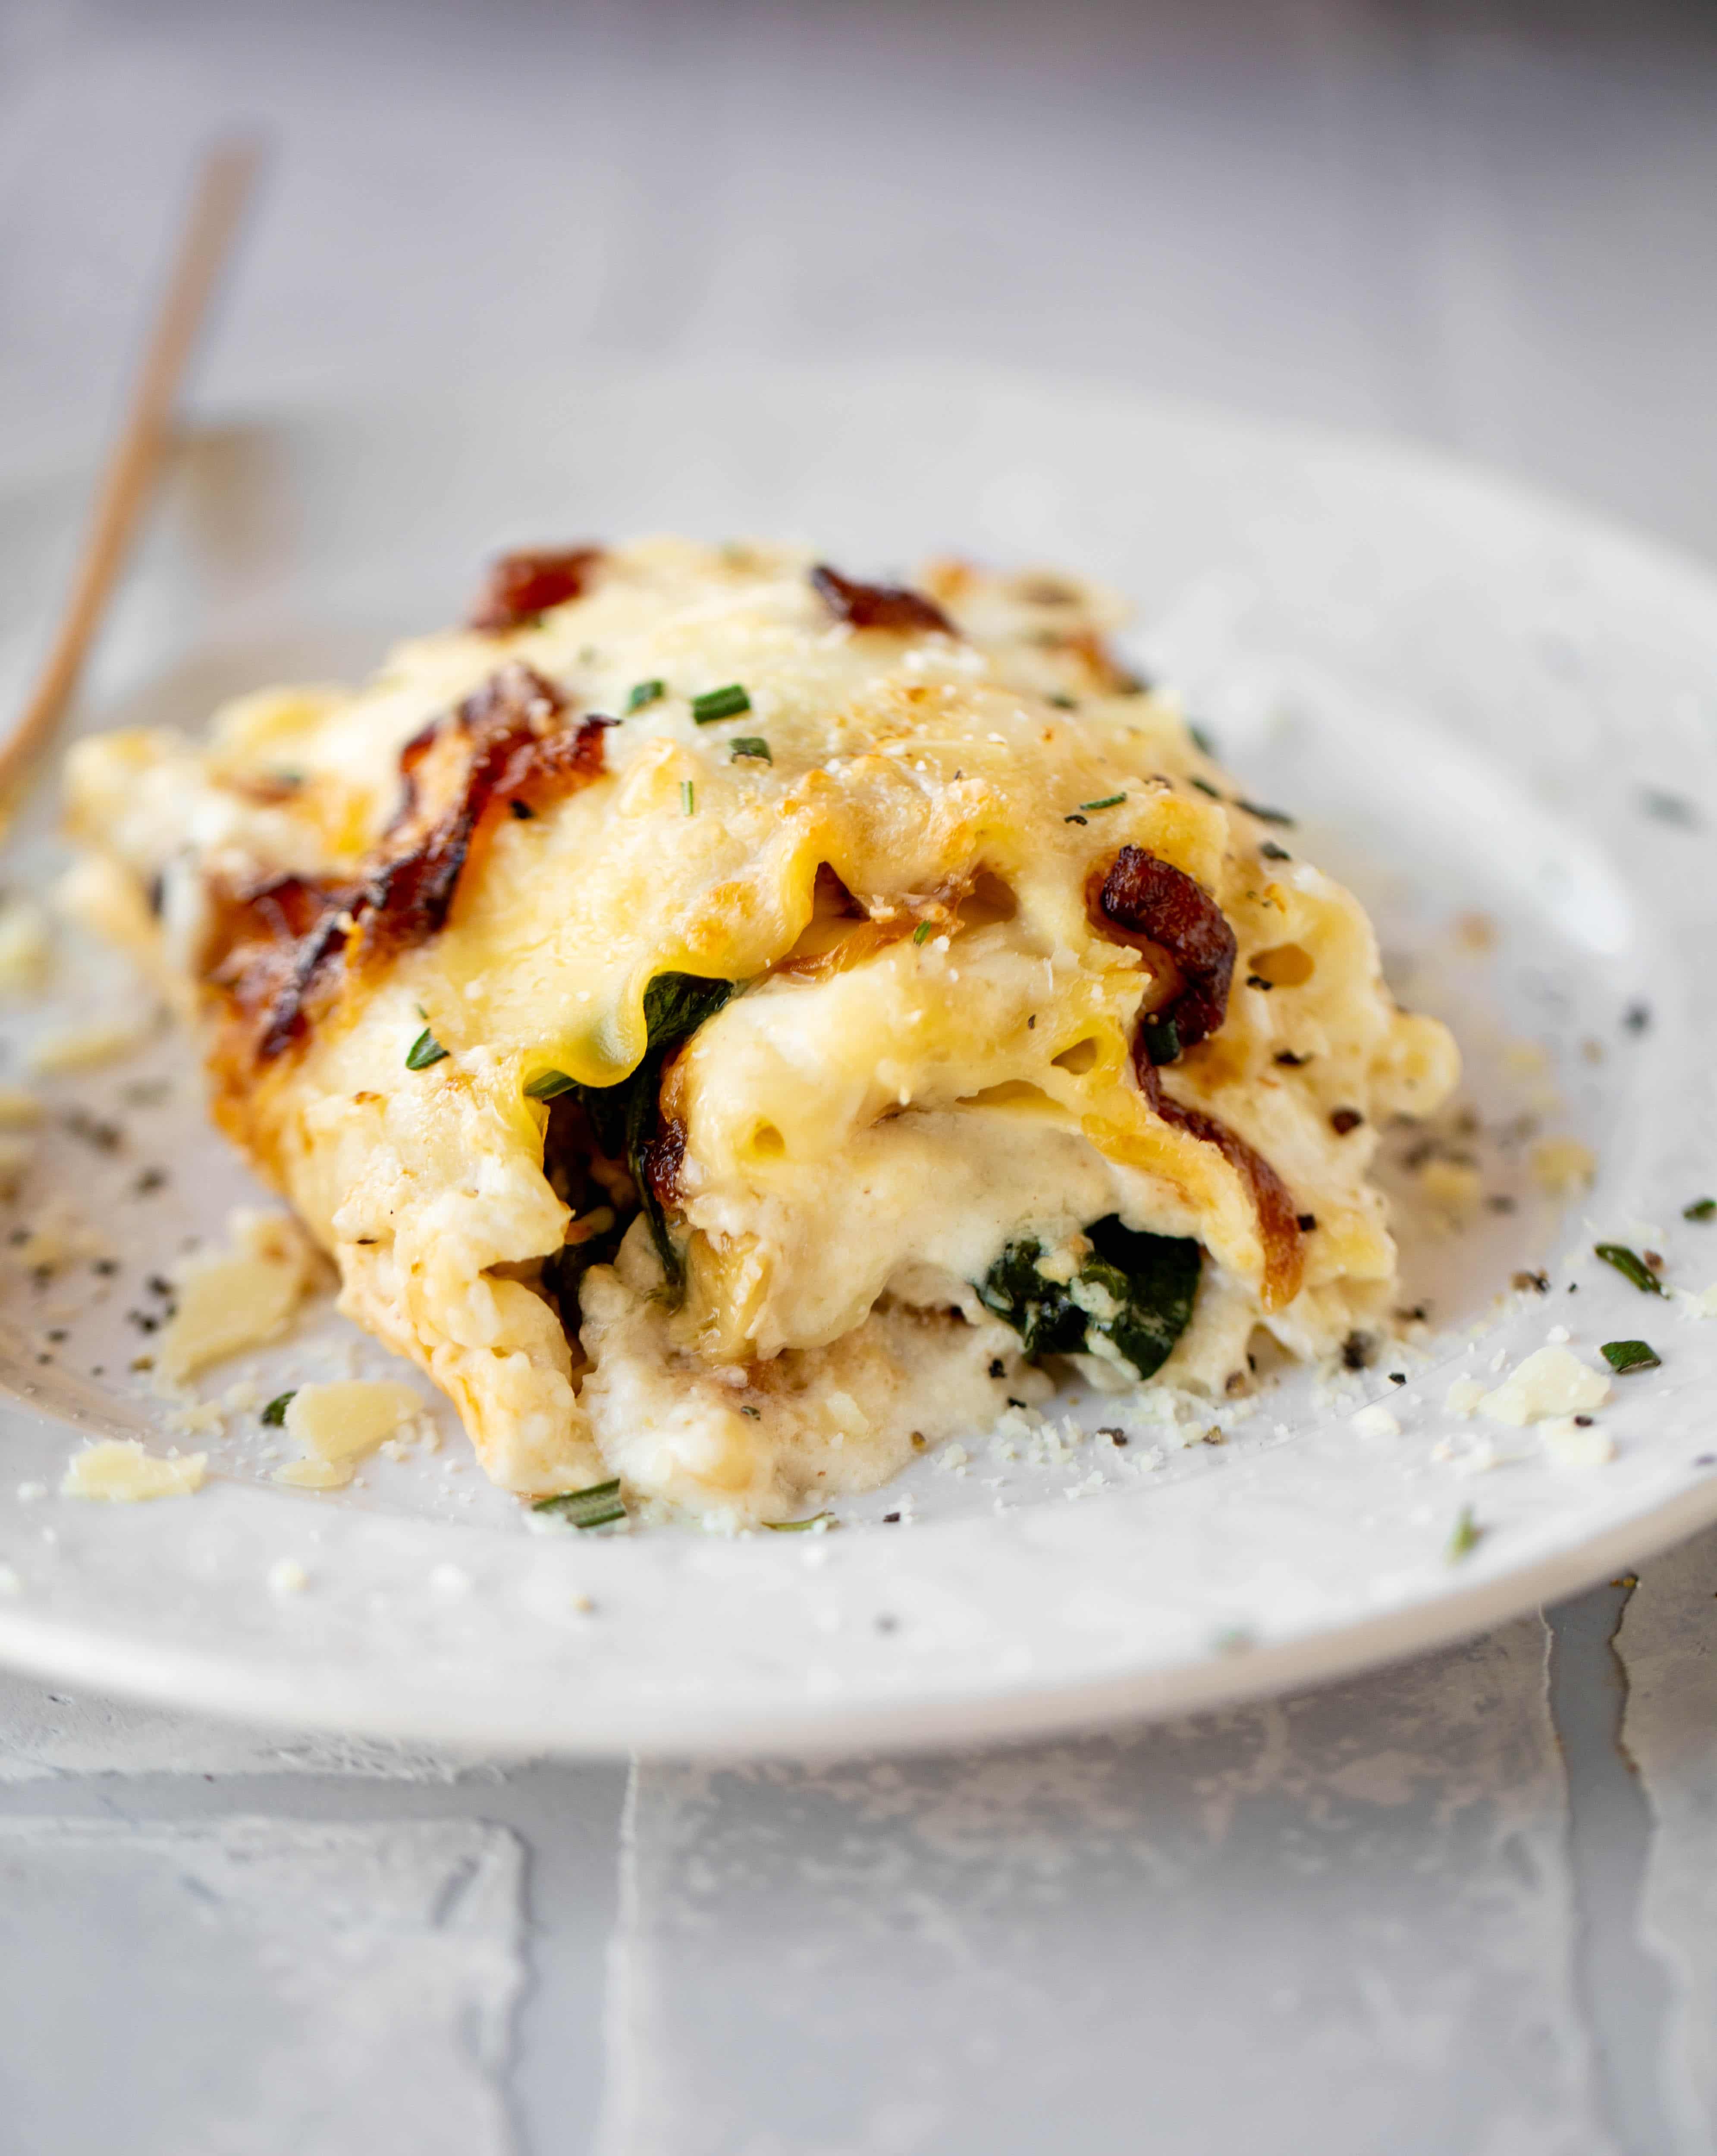 These french onion chicken lasagna roll ups are loaded with flavor! Creamy sauce, chicken, spinach, caramelized onions and gruyere cheese. Love!